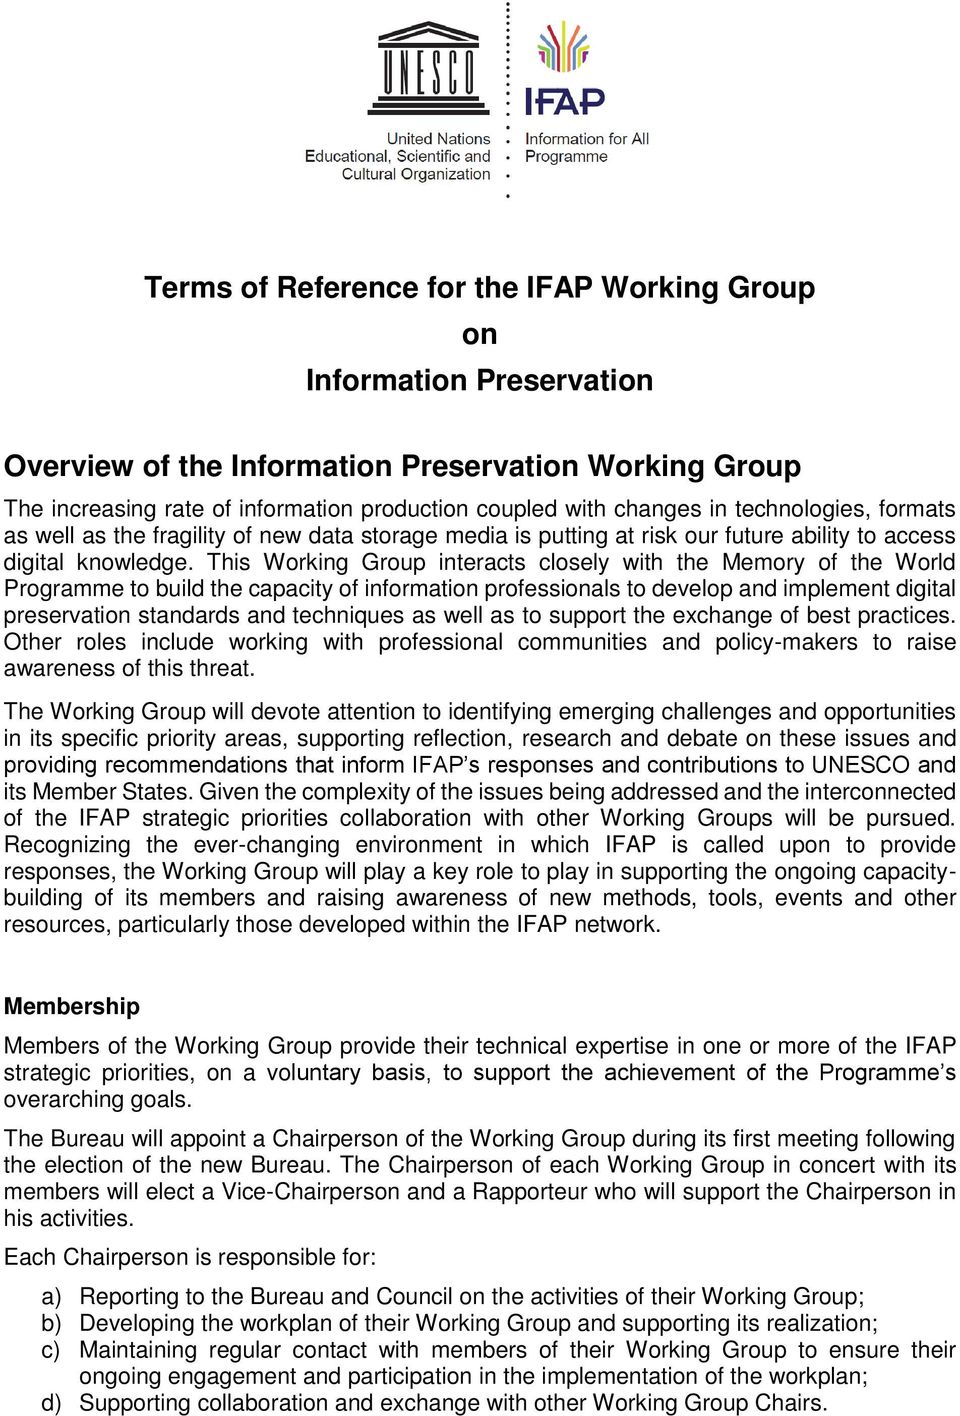 This Working Group interacts closely with the Memory of the World Programme to build the capacity of information professionals to develop and implement digital preservation standards and techniques